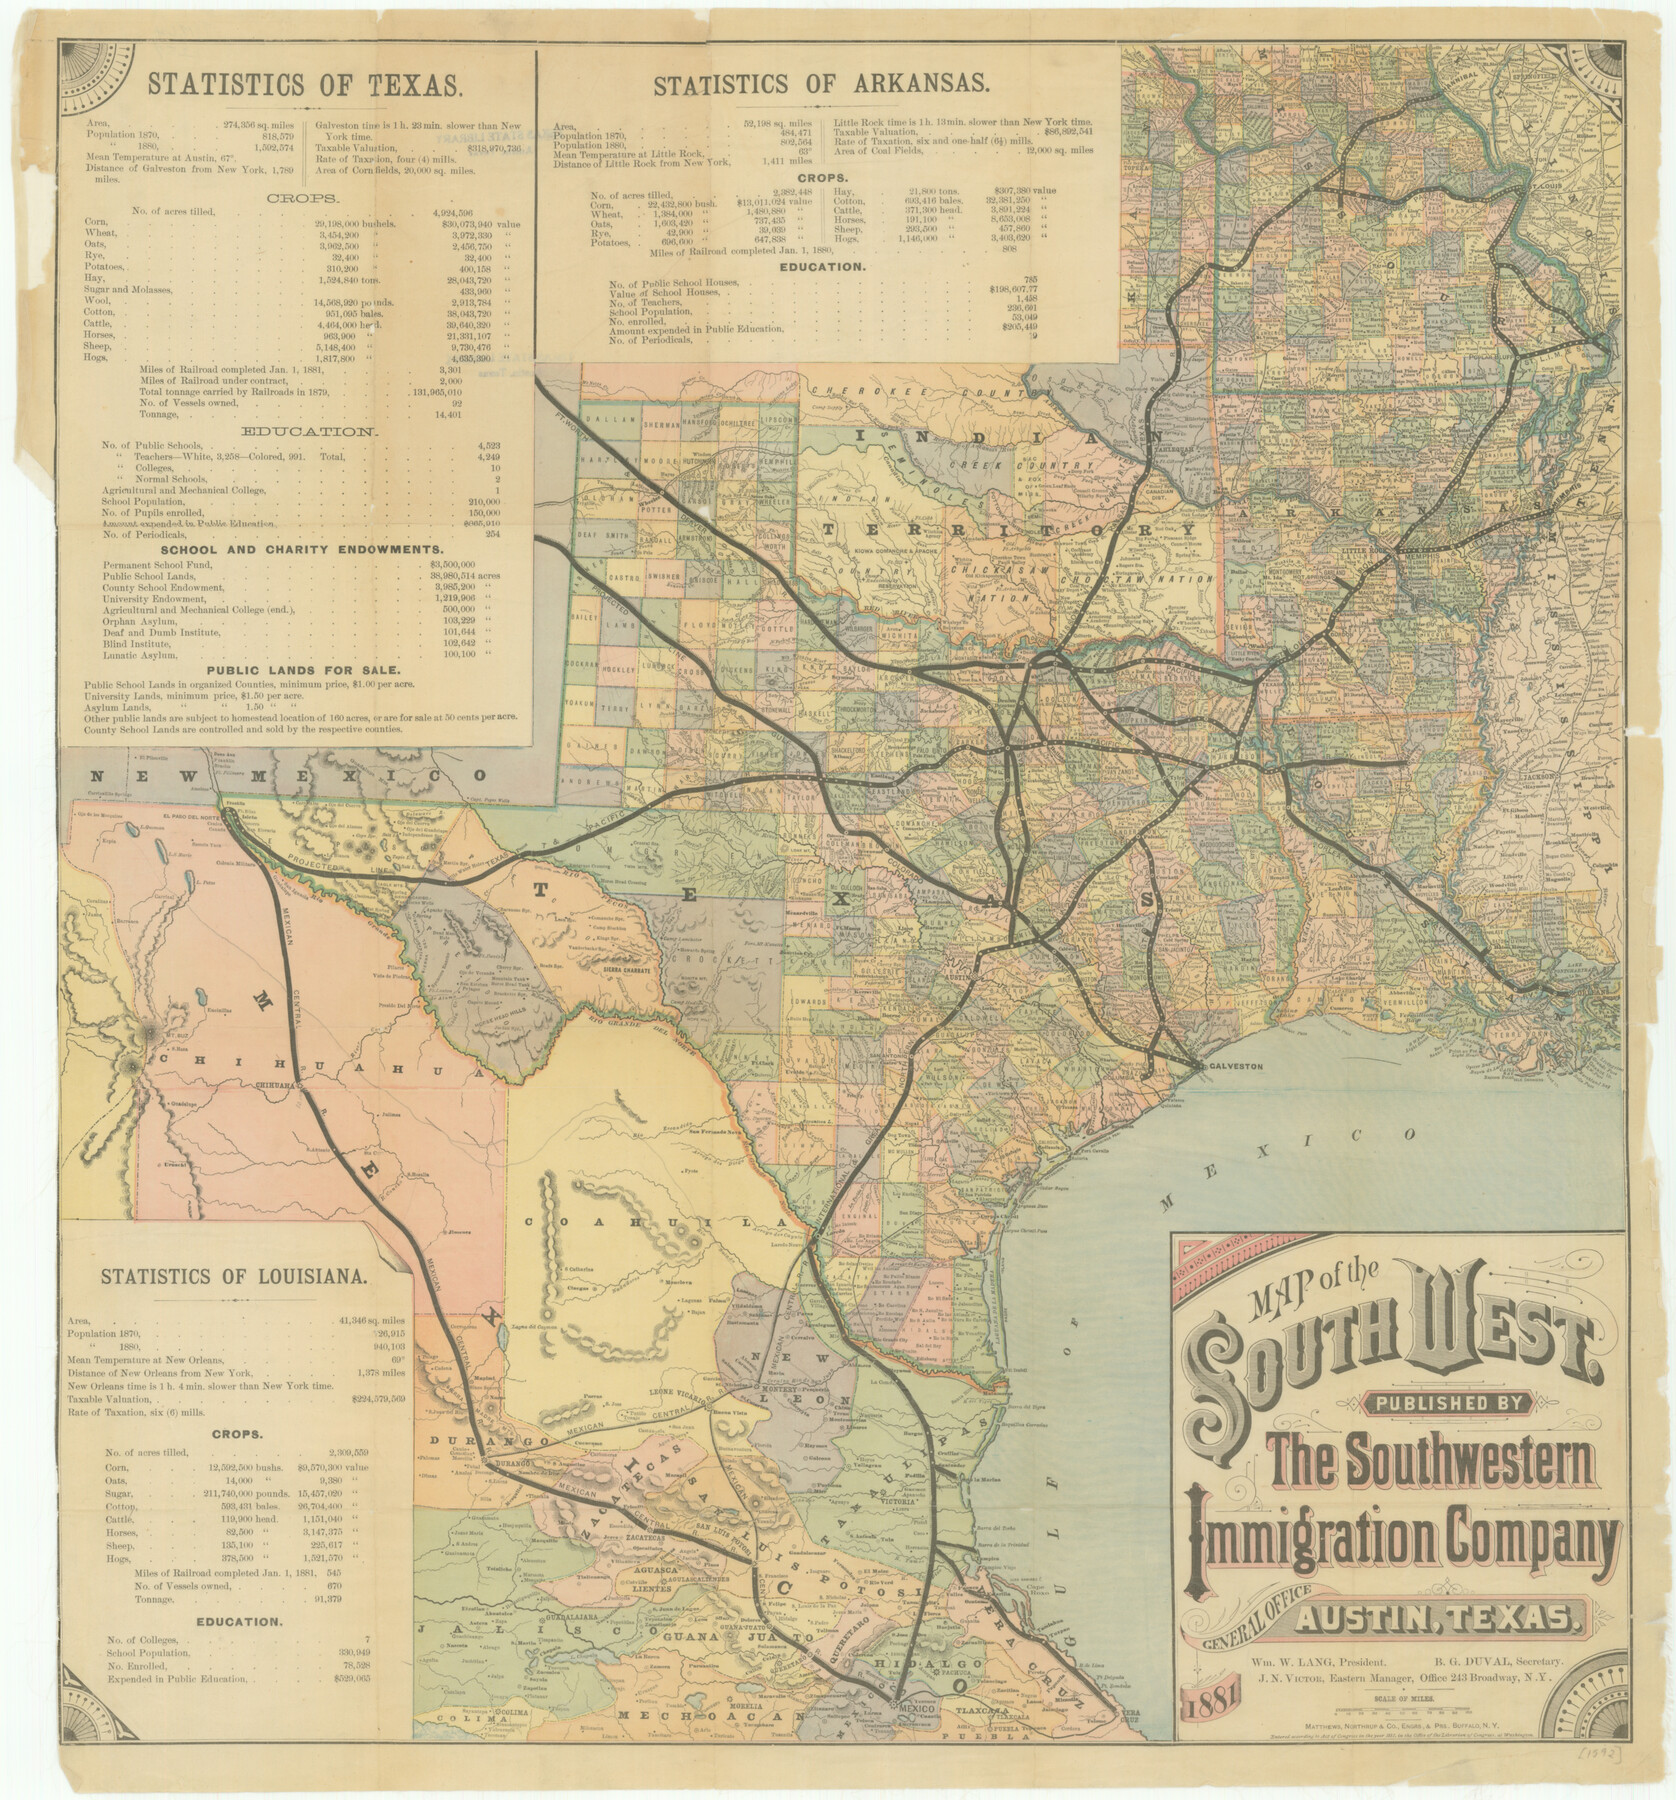 76243, Map of the Southwest, Texas State Library and Archives